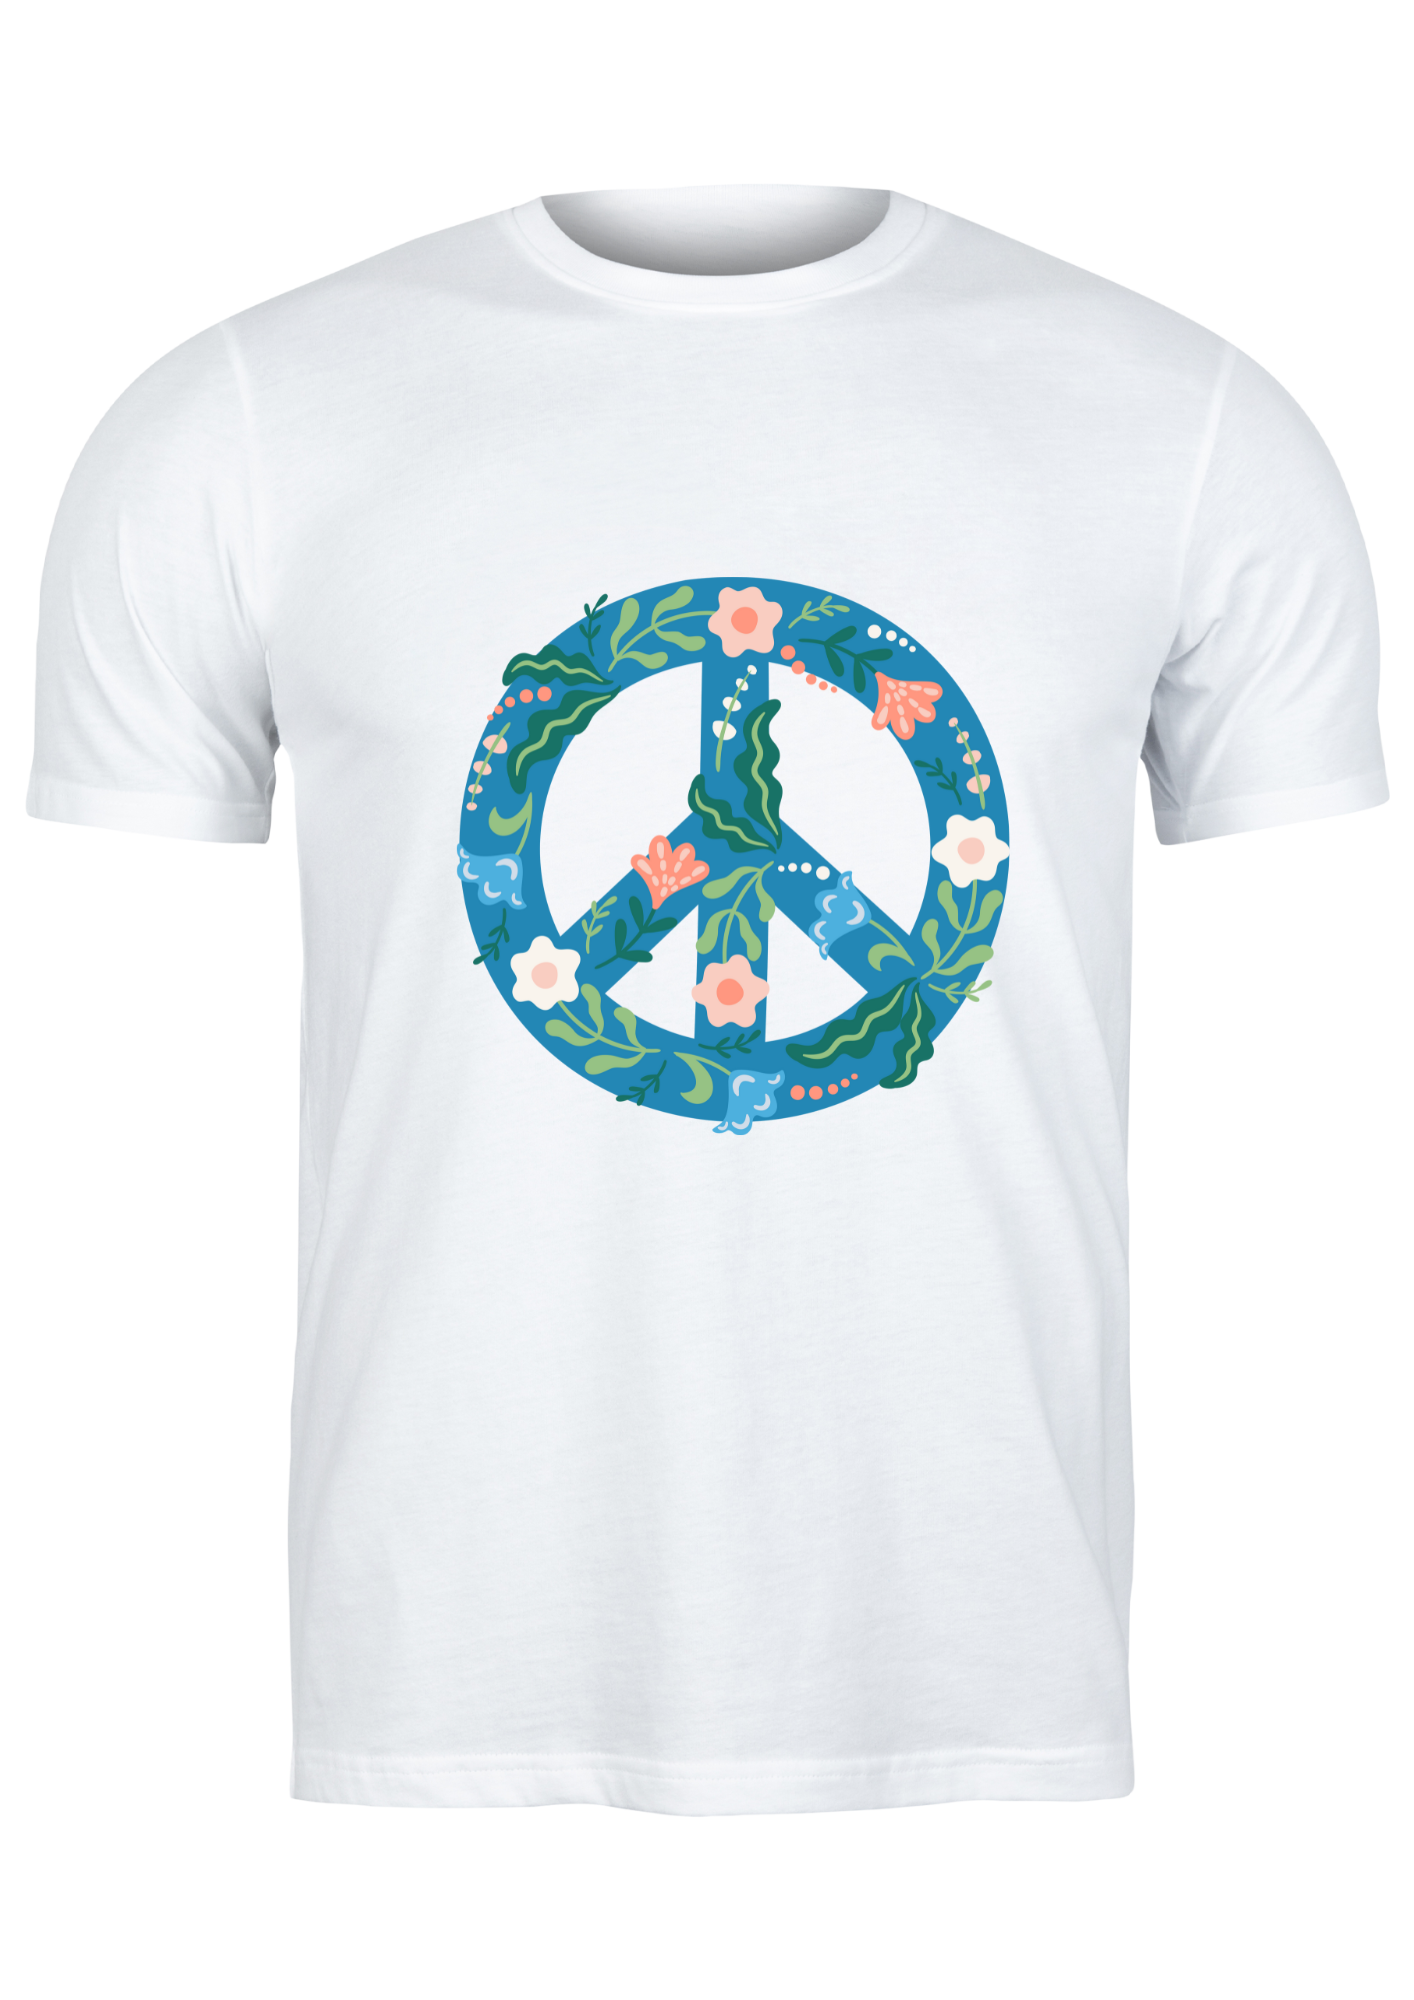 Unisex T Shirt Printed Floral Peace